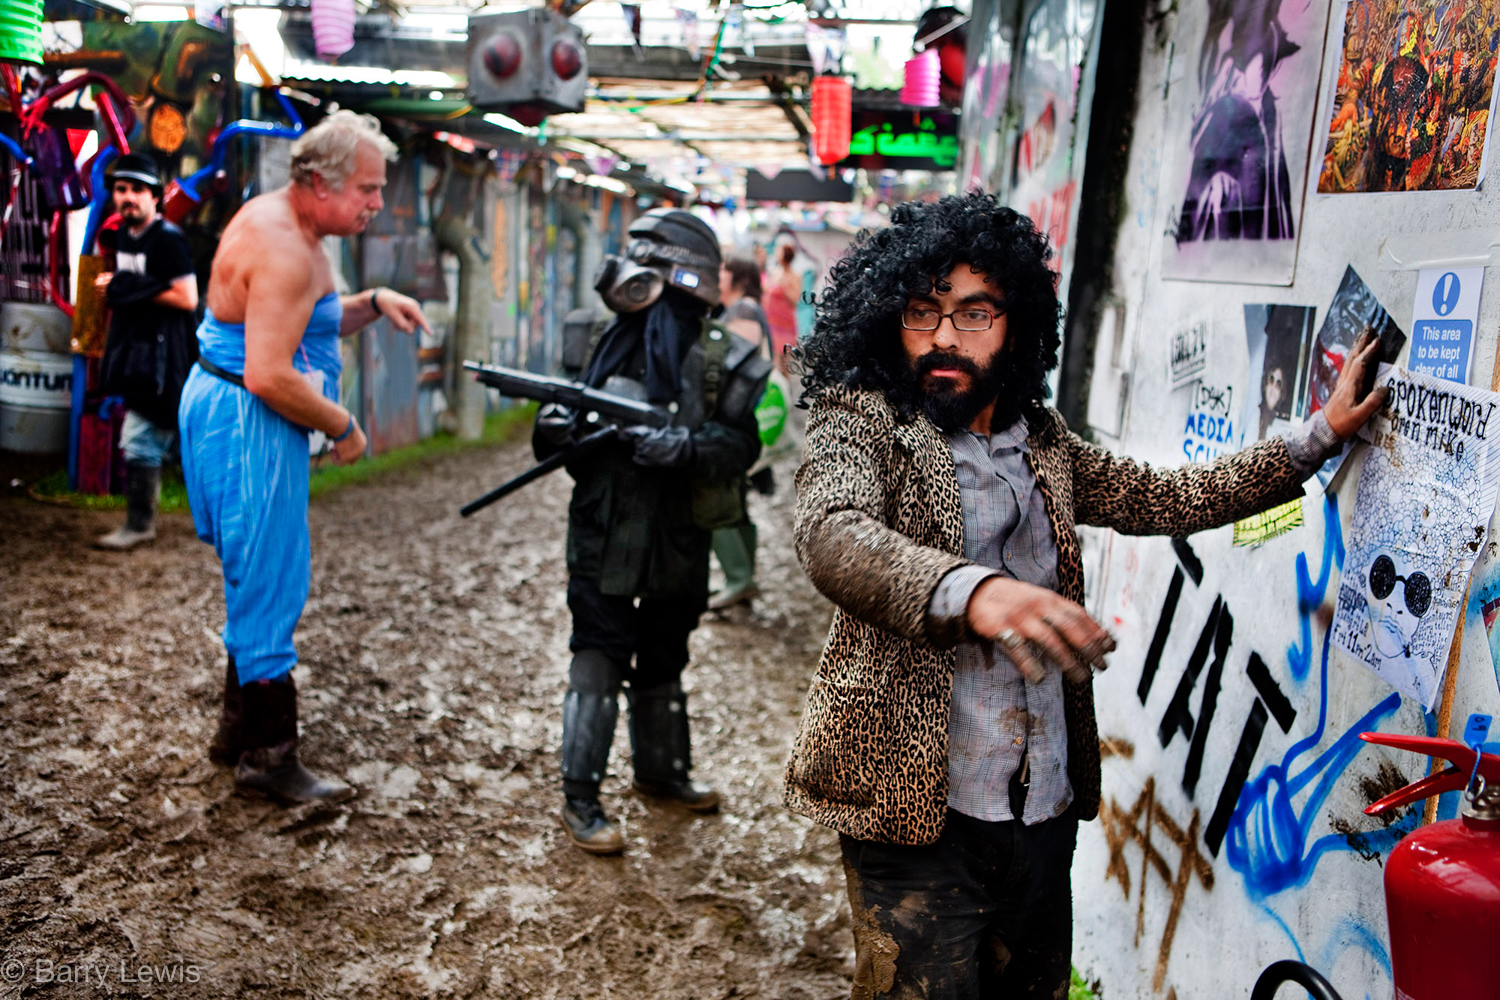  Confusion reigns in the alleyways of Shangri-La during the Glastonbury Festival, 2009, Somerset, United Kingdom 